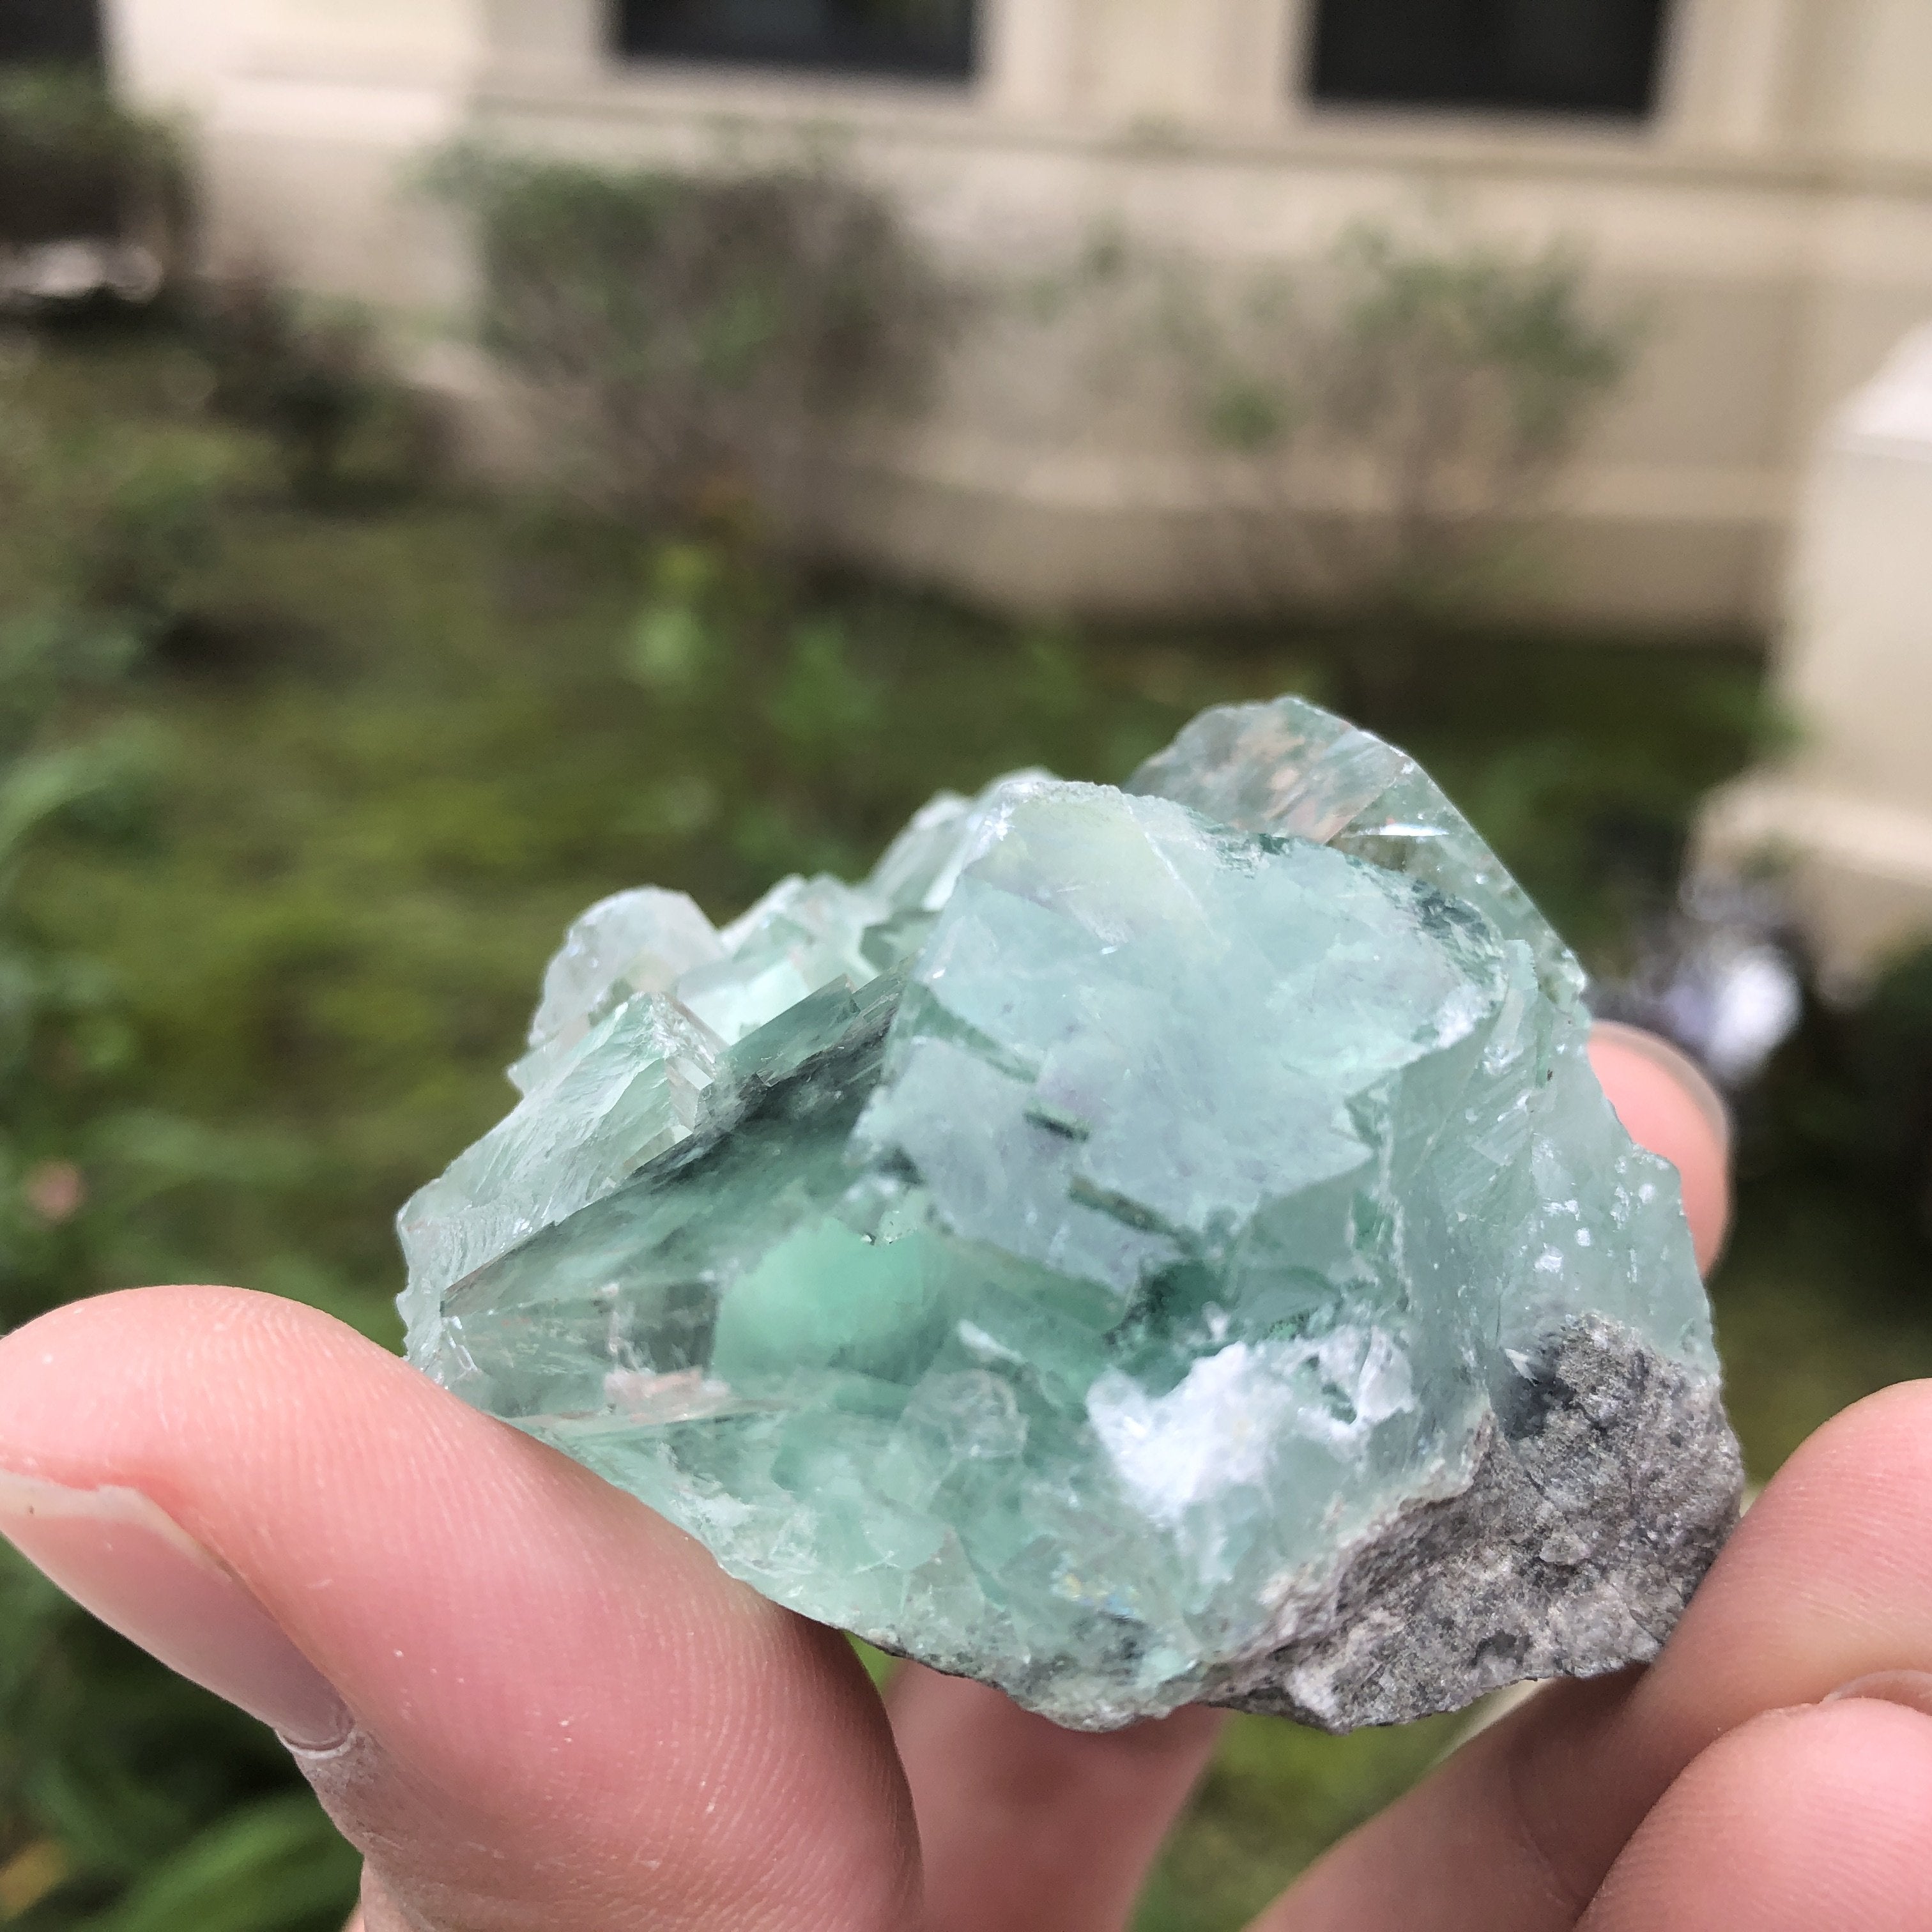 120g 7x6x4cm Glass Green and Clear Fluorite from Xianghualing,Hunan,CHINA - Locco Decor